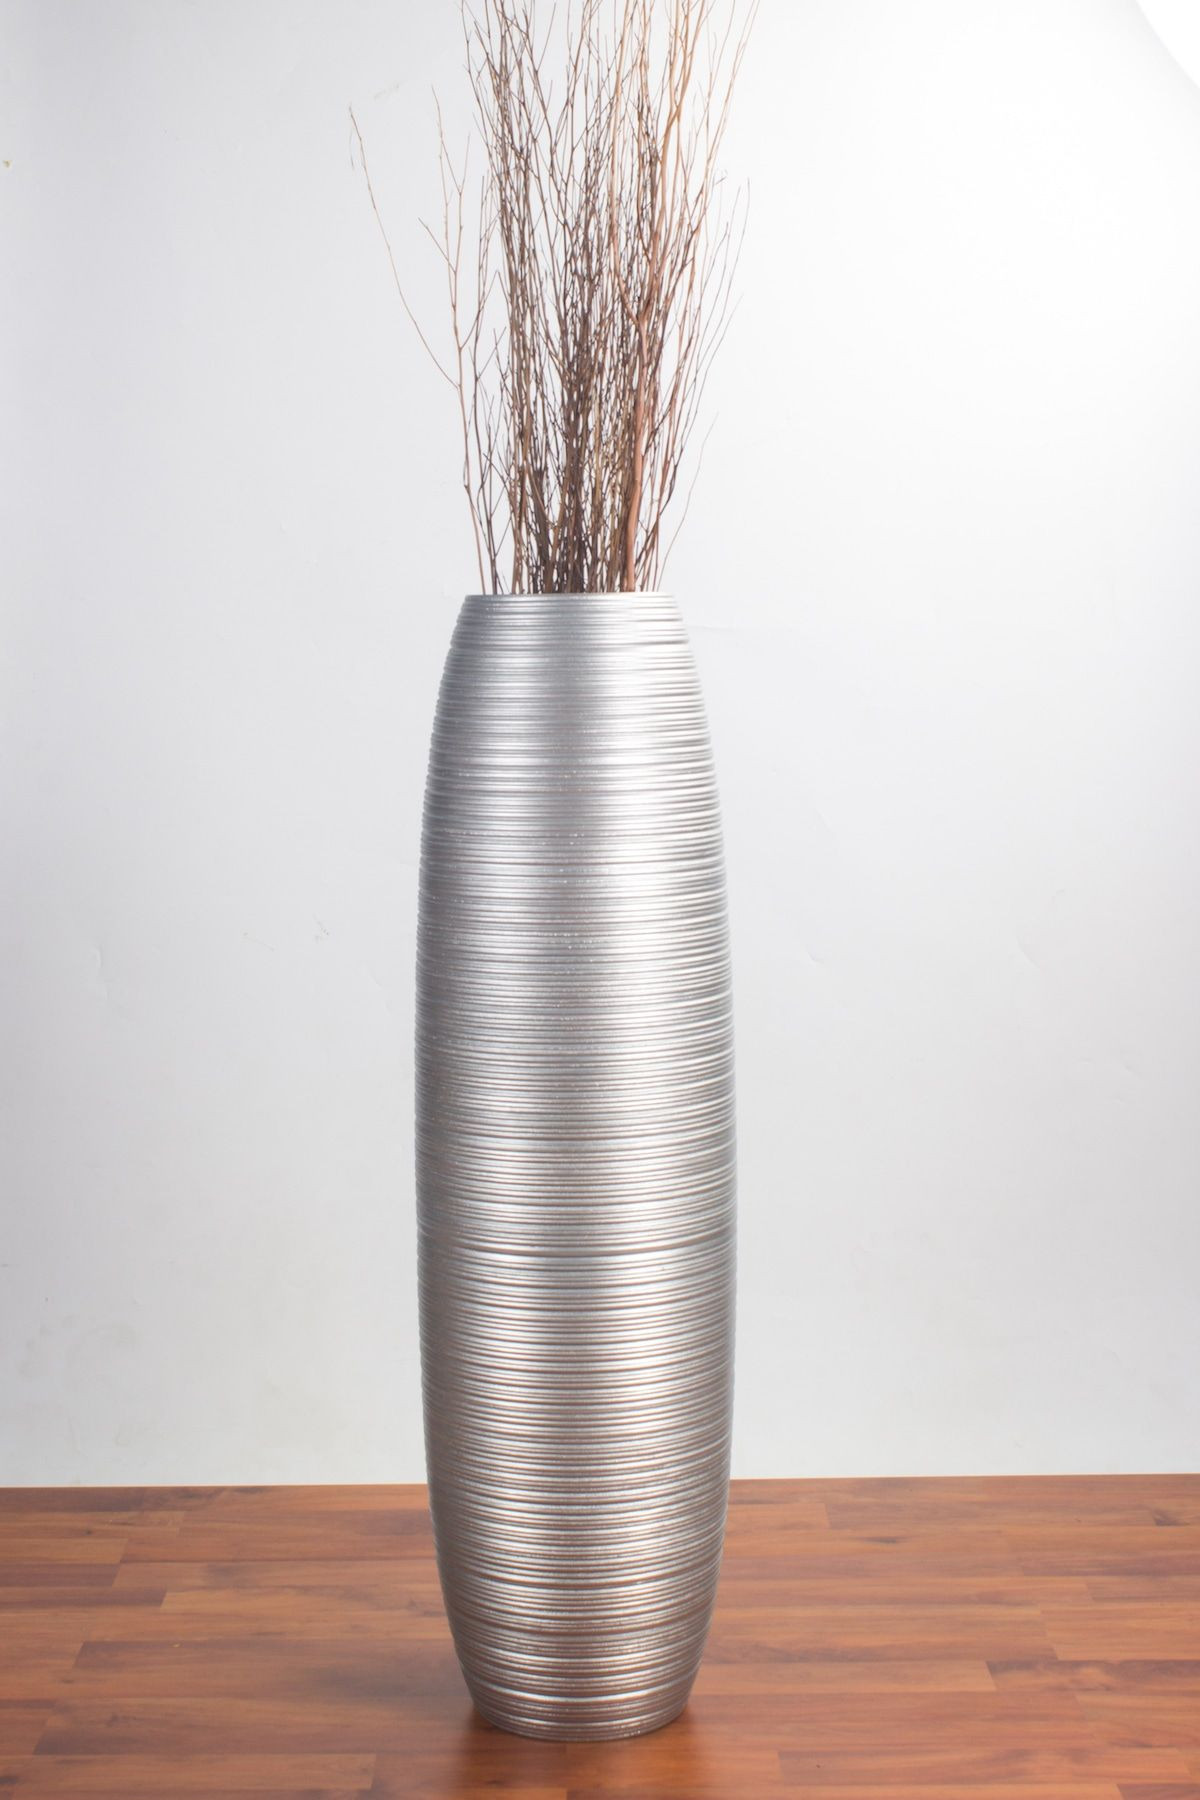 25 Stunning Z Gallerie Vases 2024 free download z gallerie vases of image of large metal floor vases vases artificial plants collection in large metal floor vases pics tall floor vase 36 inches wood silver home pinterest of image